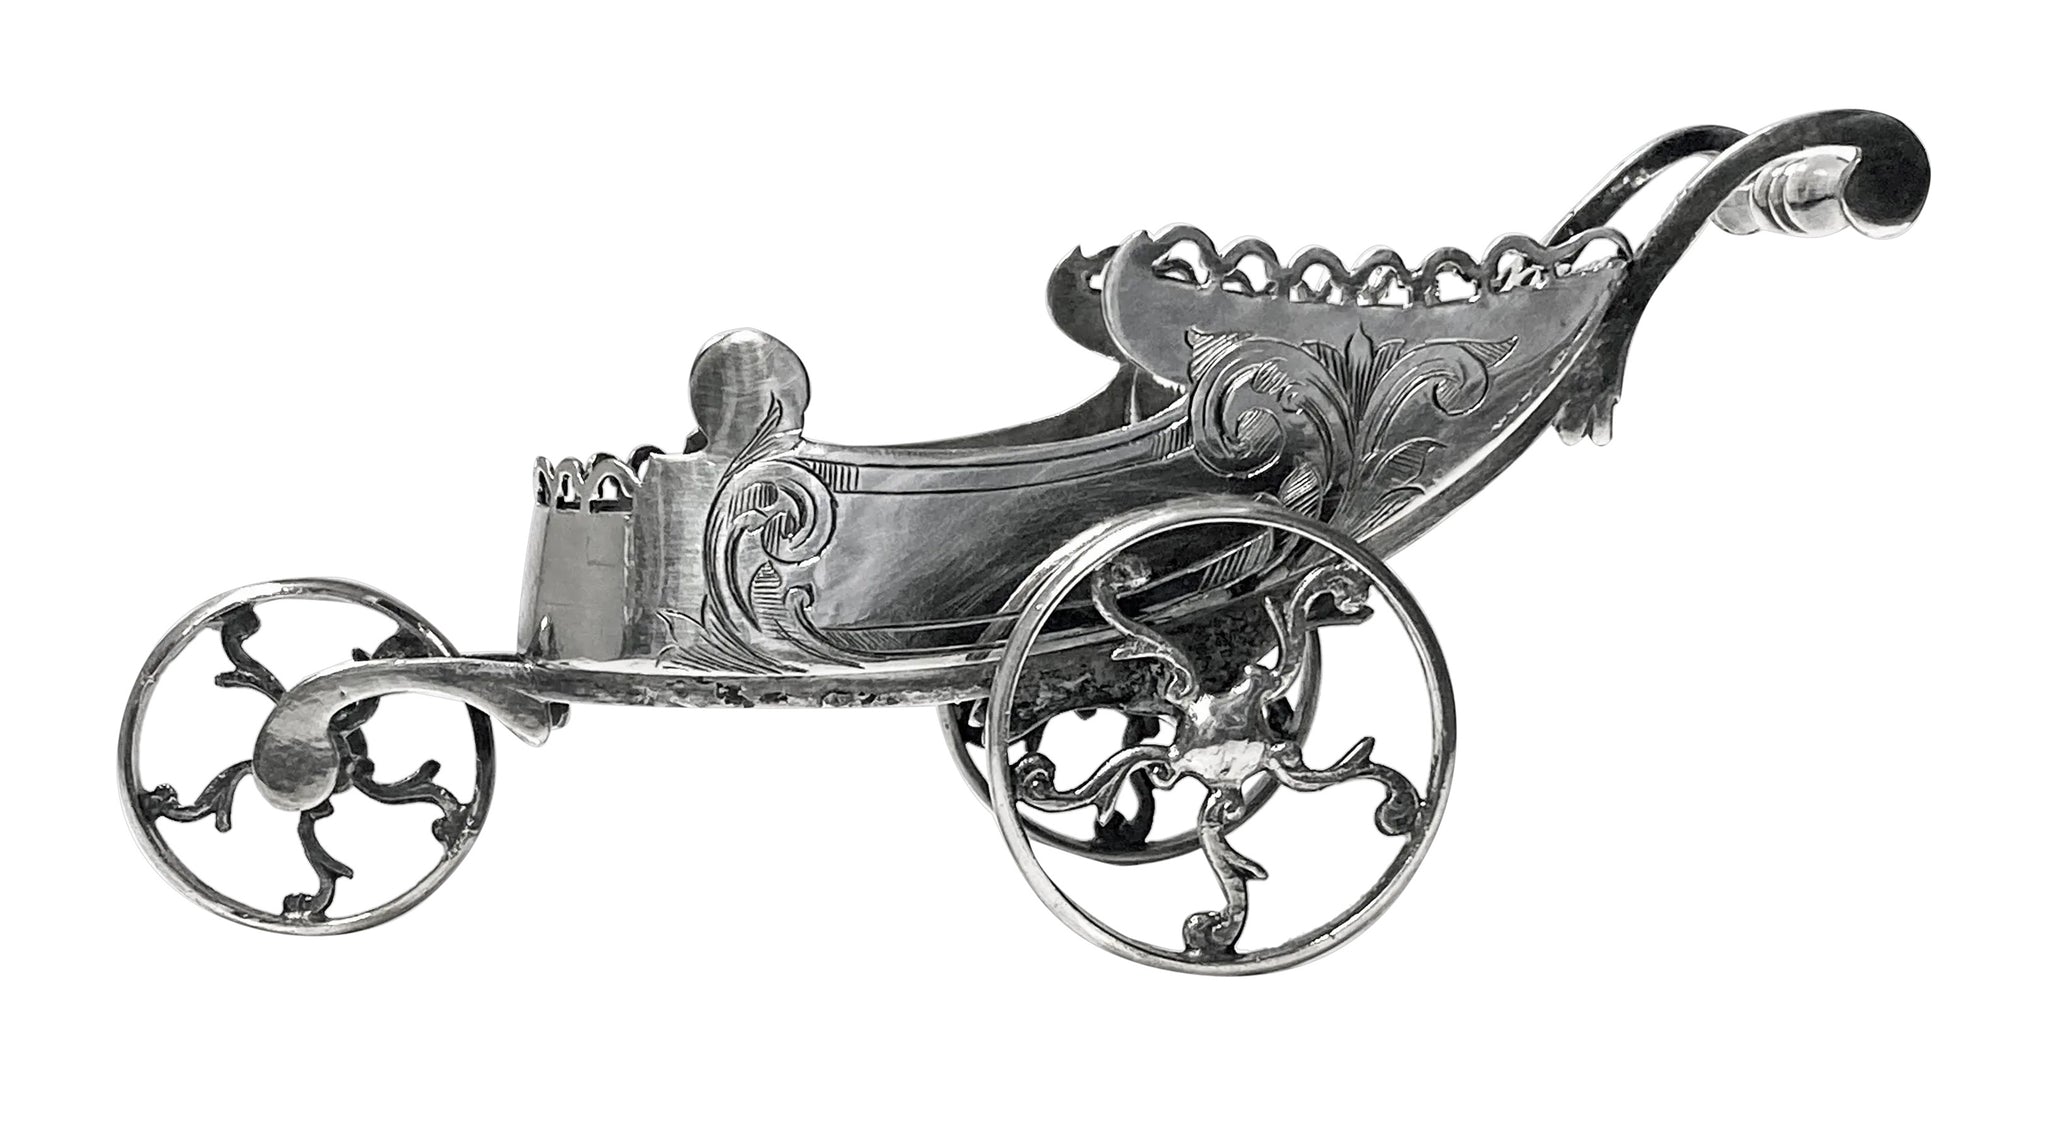 Novelty silver plate Chariot Carriage Continental C.1870